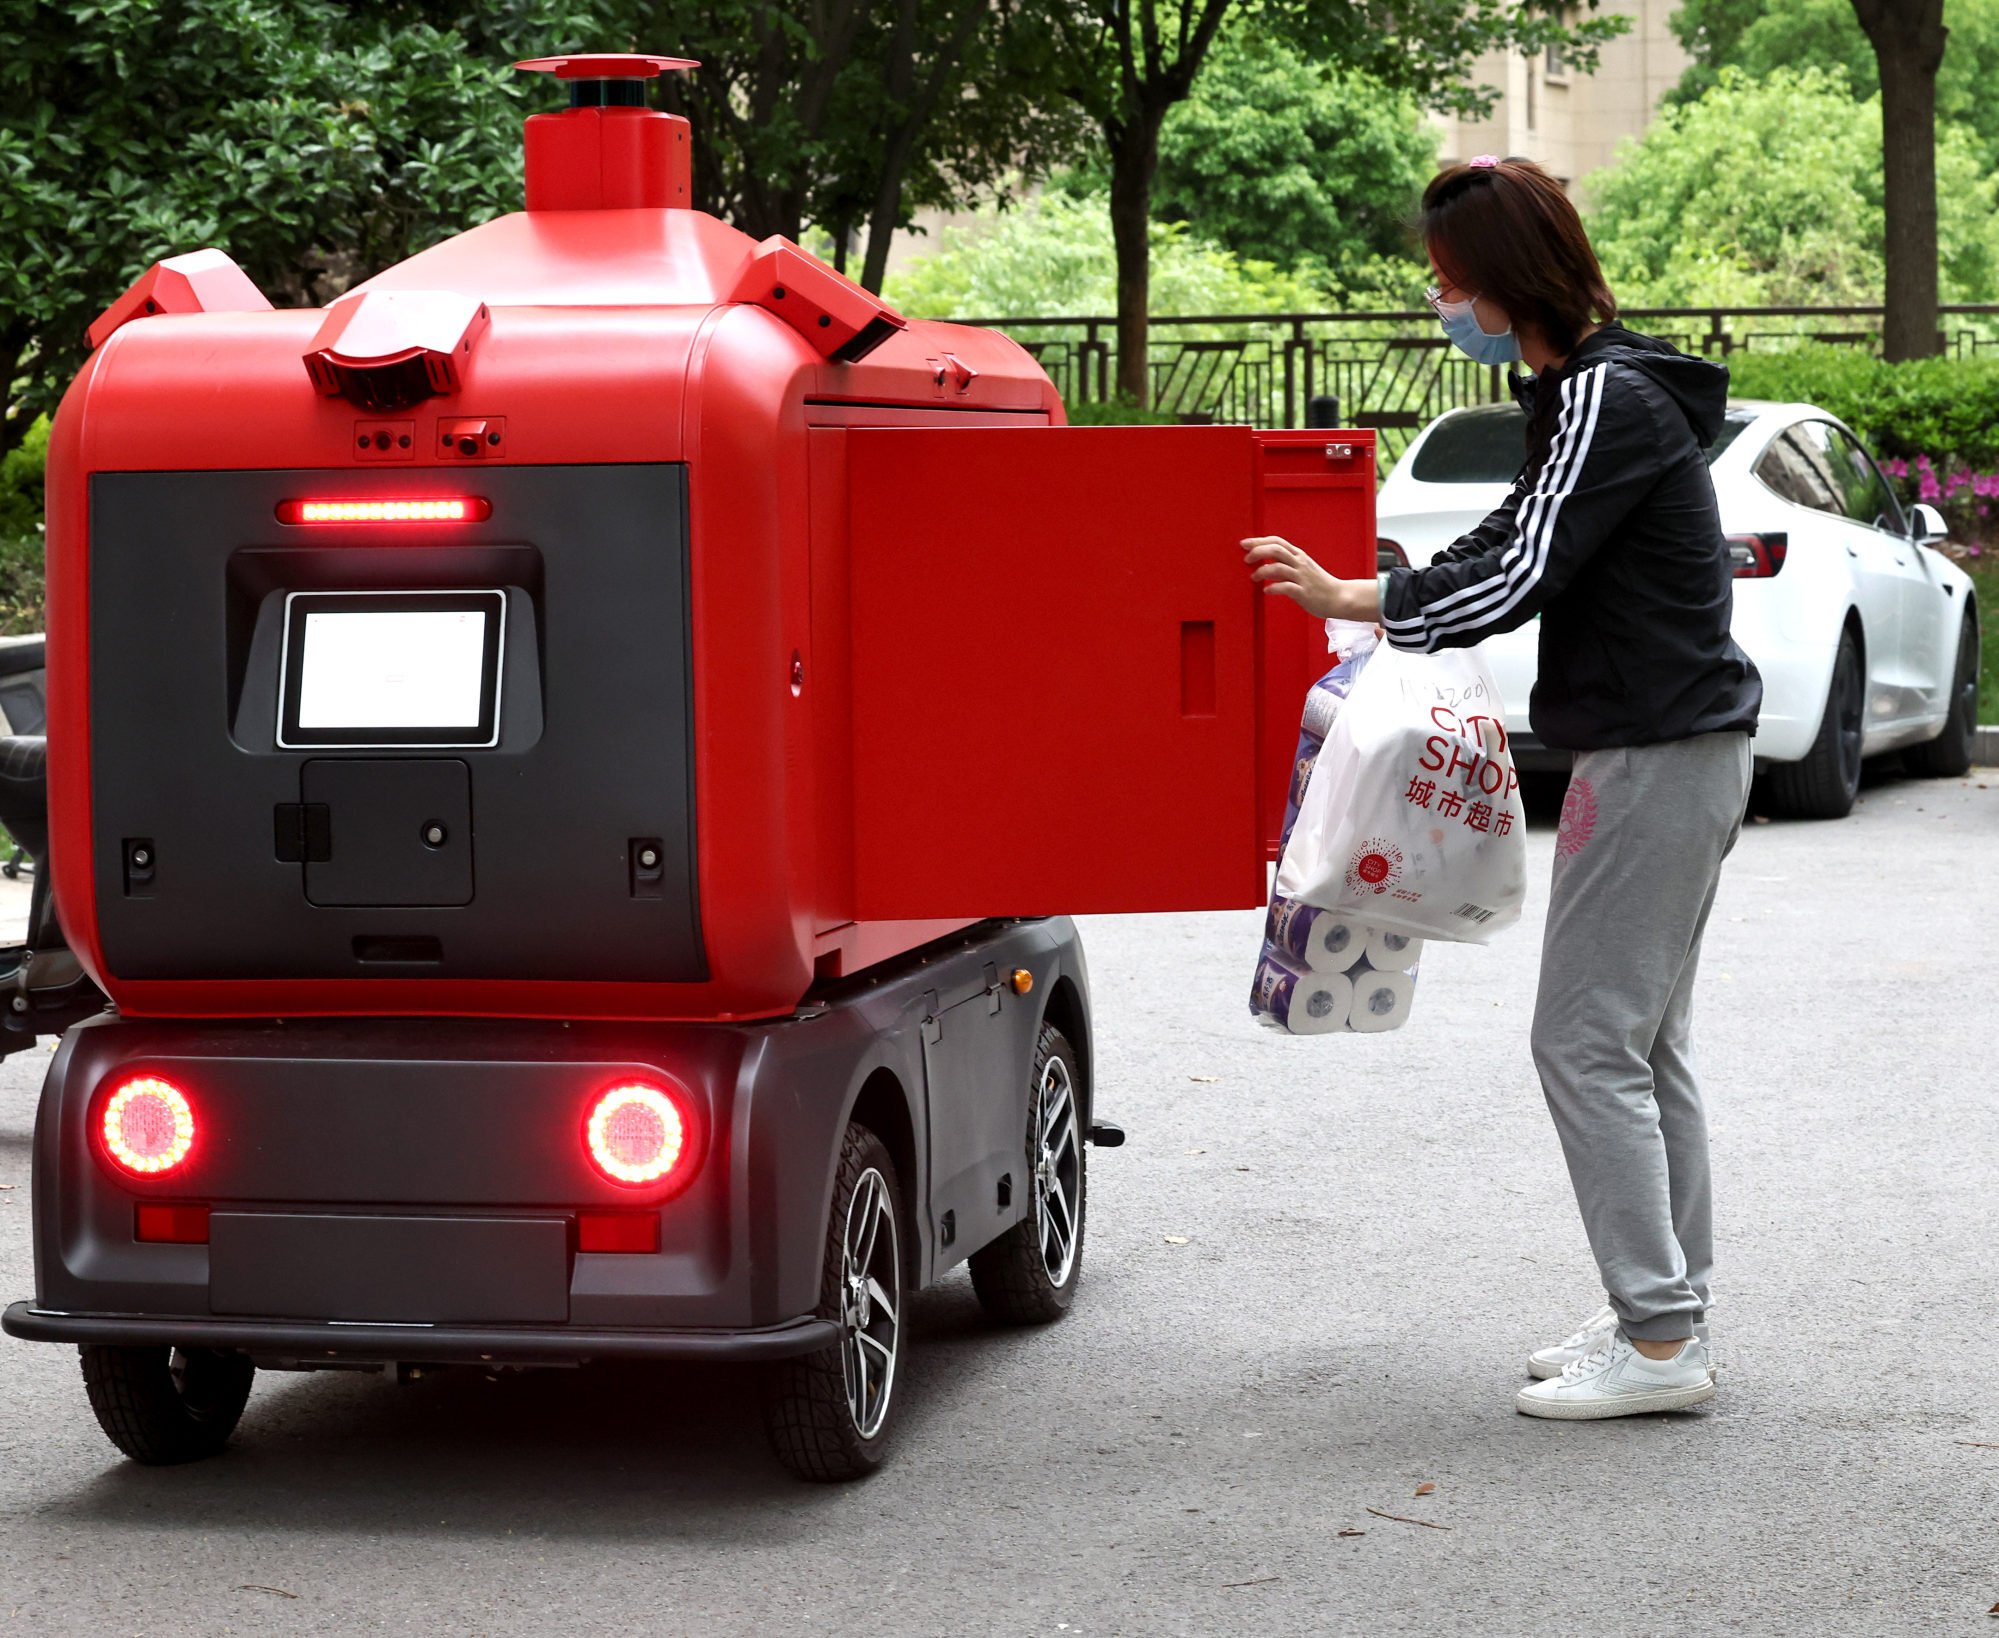 A resident collects goods from an unstaffed delivery vehicle in a community of Jiading district in Shanghai on April 25, 2022. Photo: Xinhua